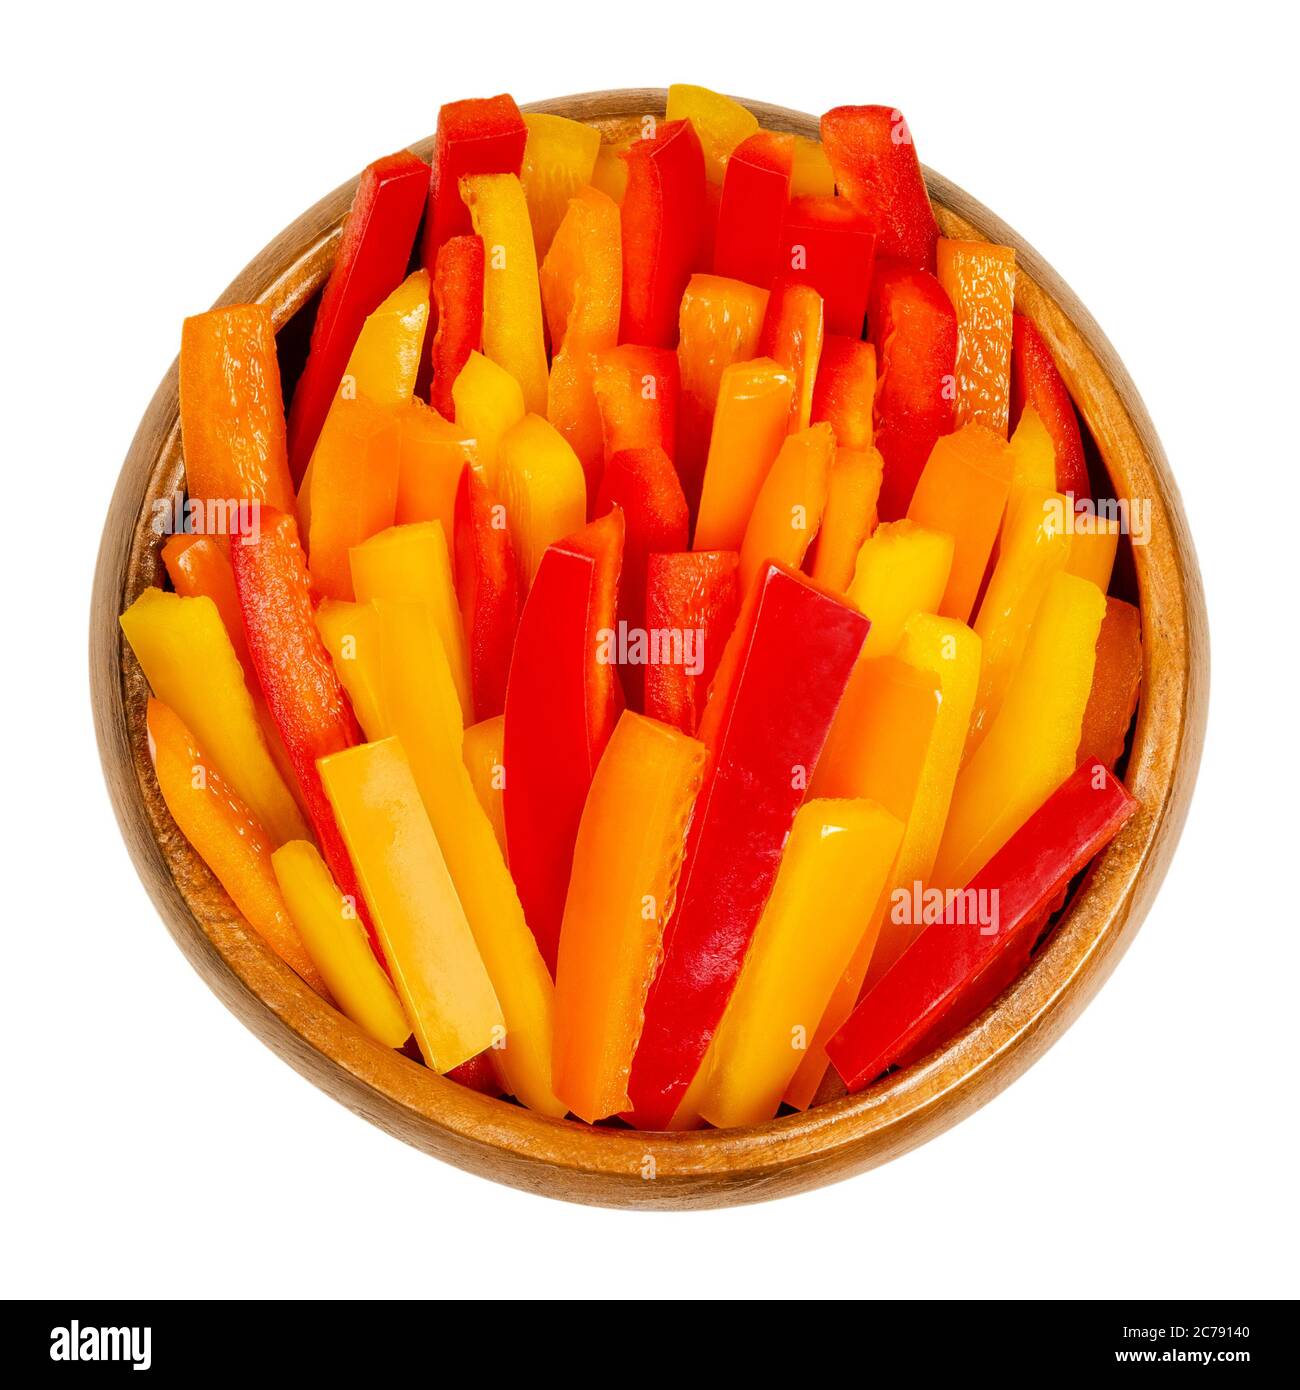 Bell pepper slices in a wooden bowl. Sweet pepper, capsicum or also called paprika, cut in colorful stripes. Fresh yellow, orange and red fruits. Stock Photo